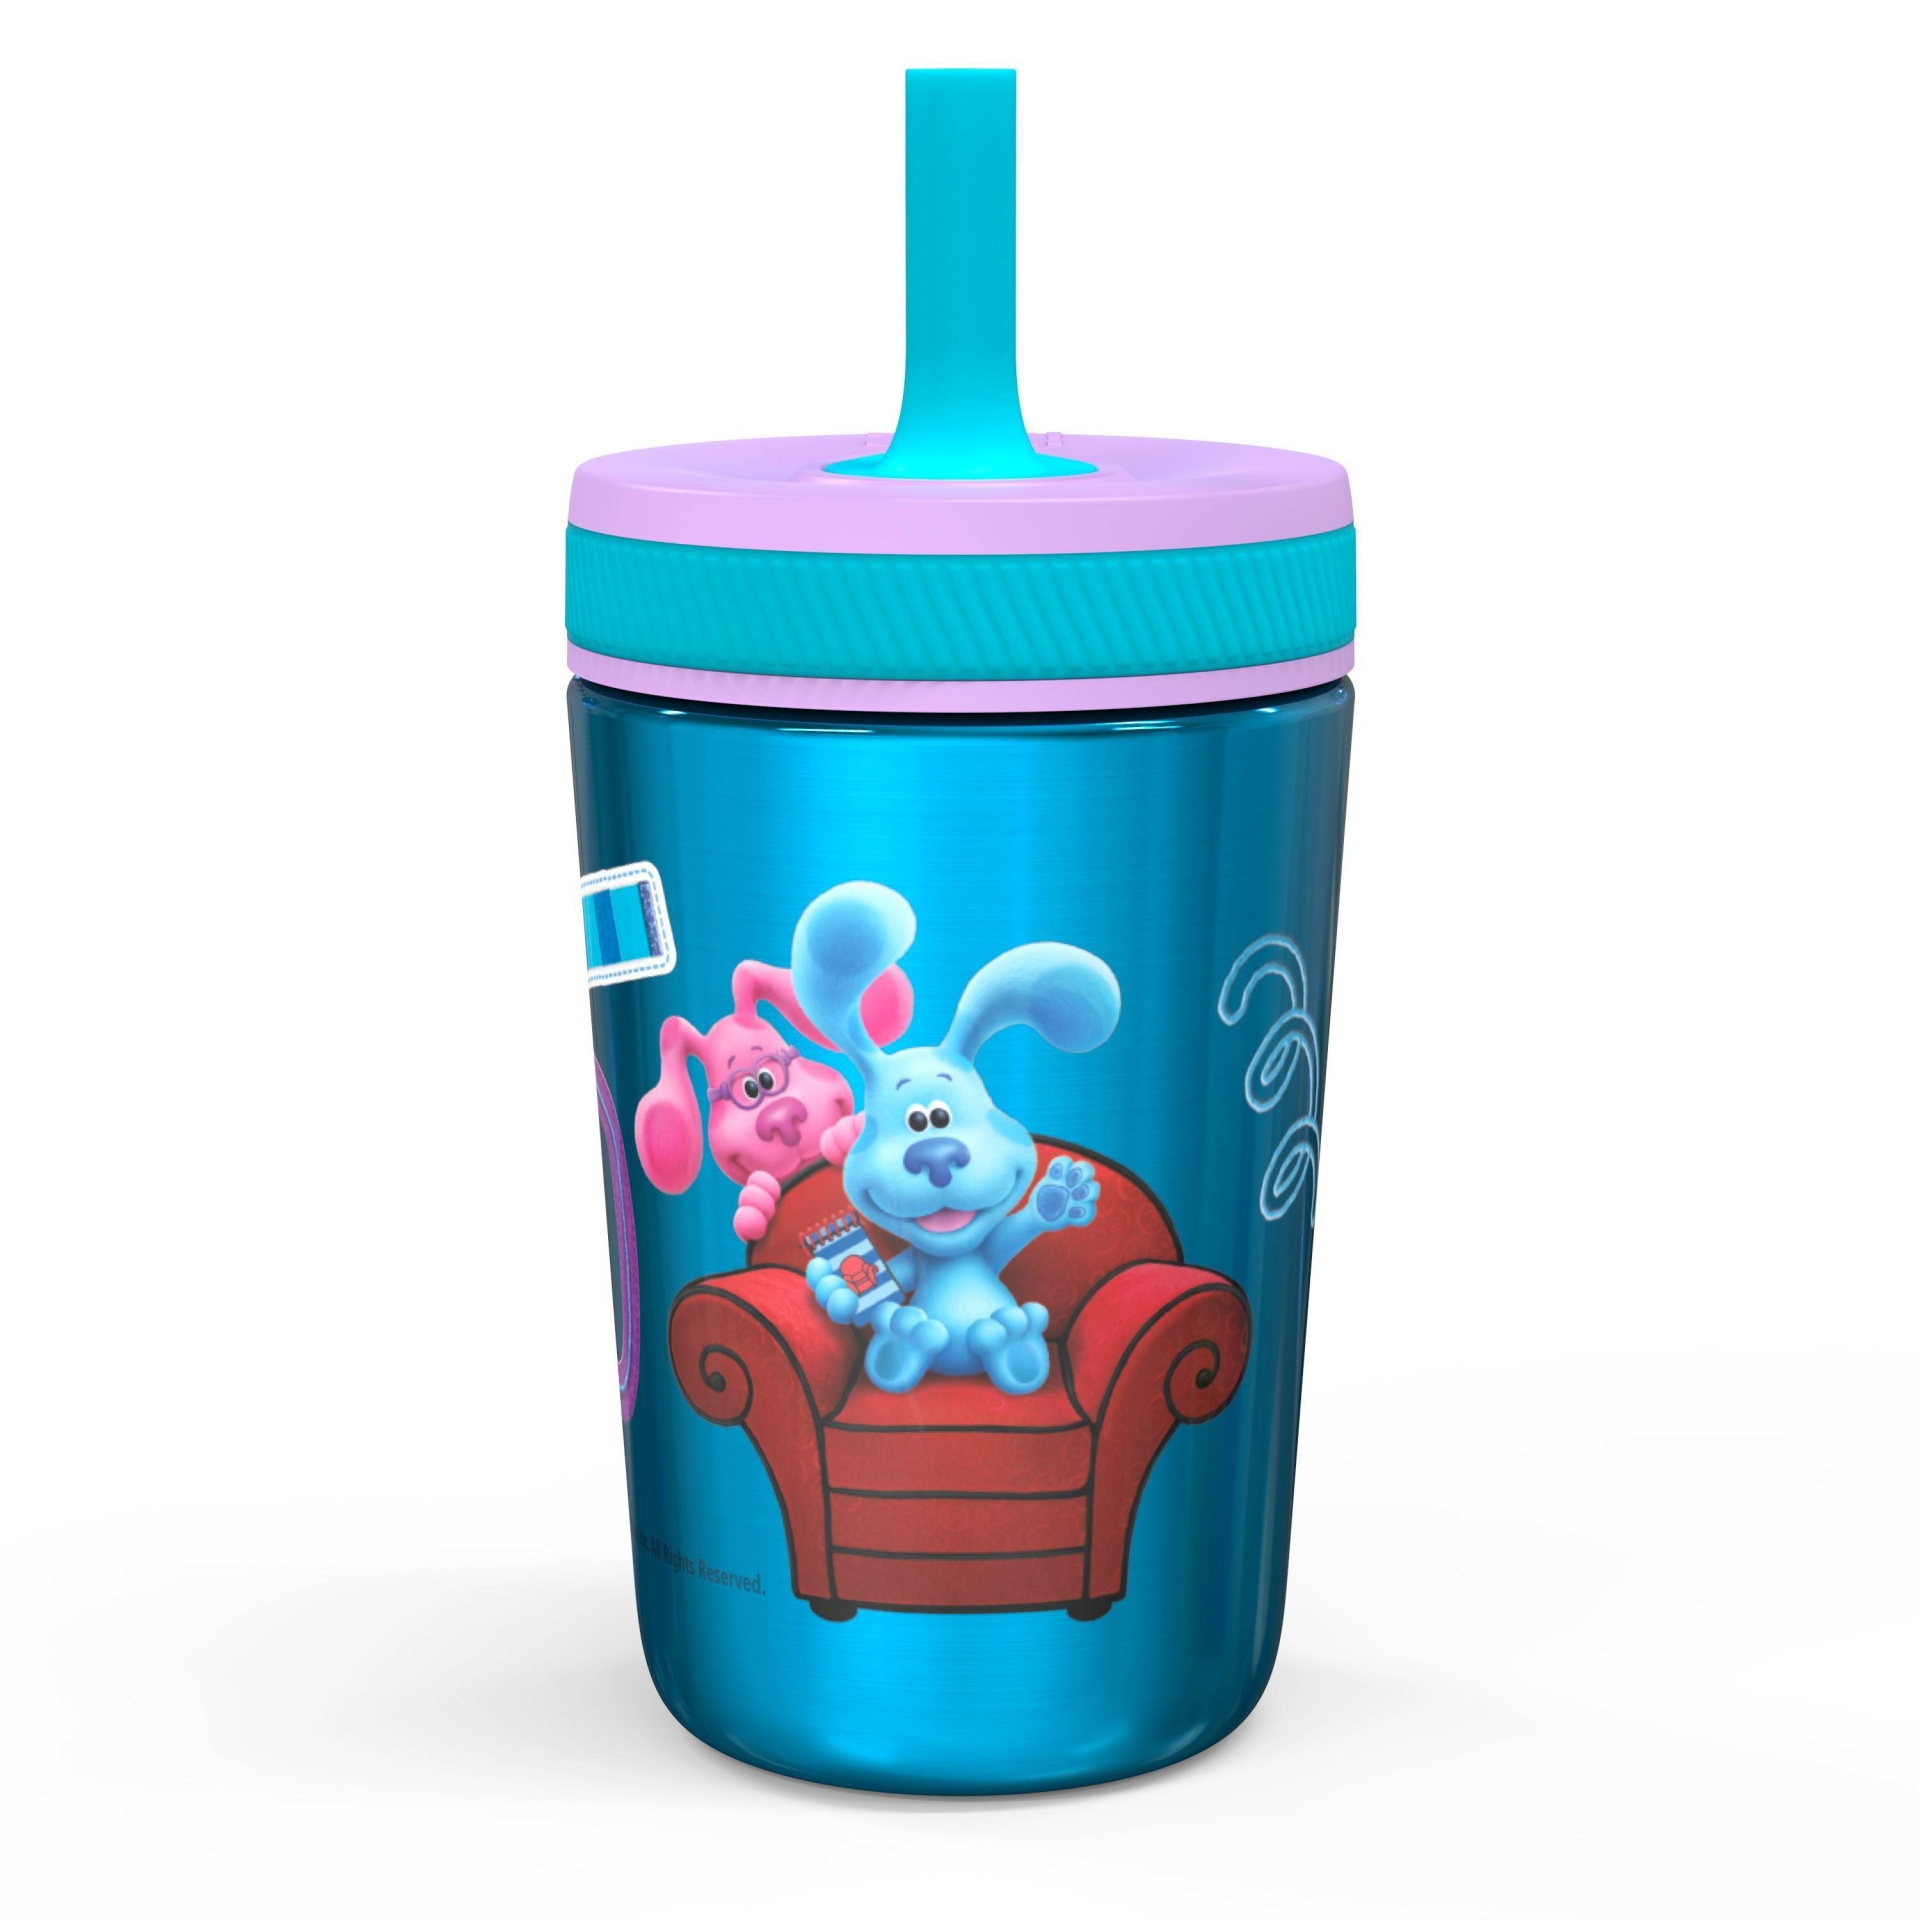 Blue's Clues & You! Blue's Clues 12oz Stainless Steel Kelso Kids Tumbler -  Zak Designs 12 oz